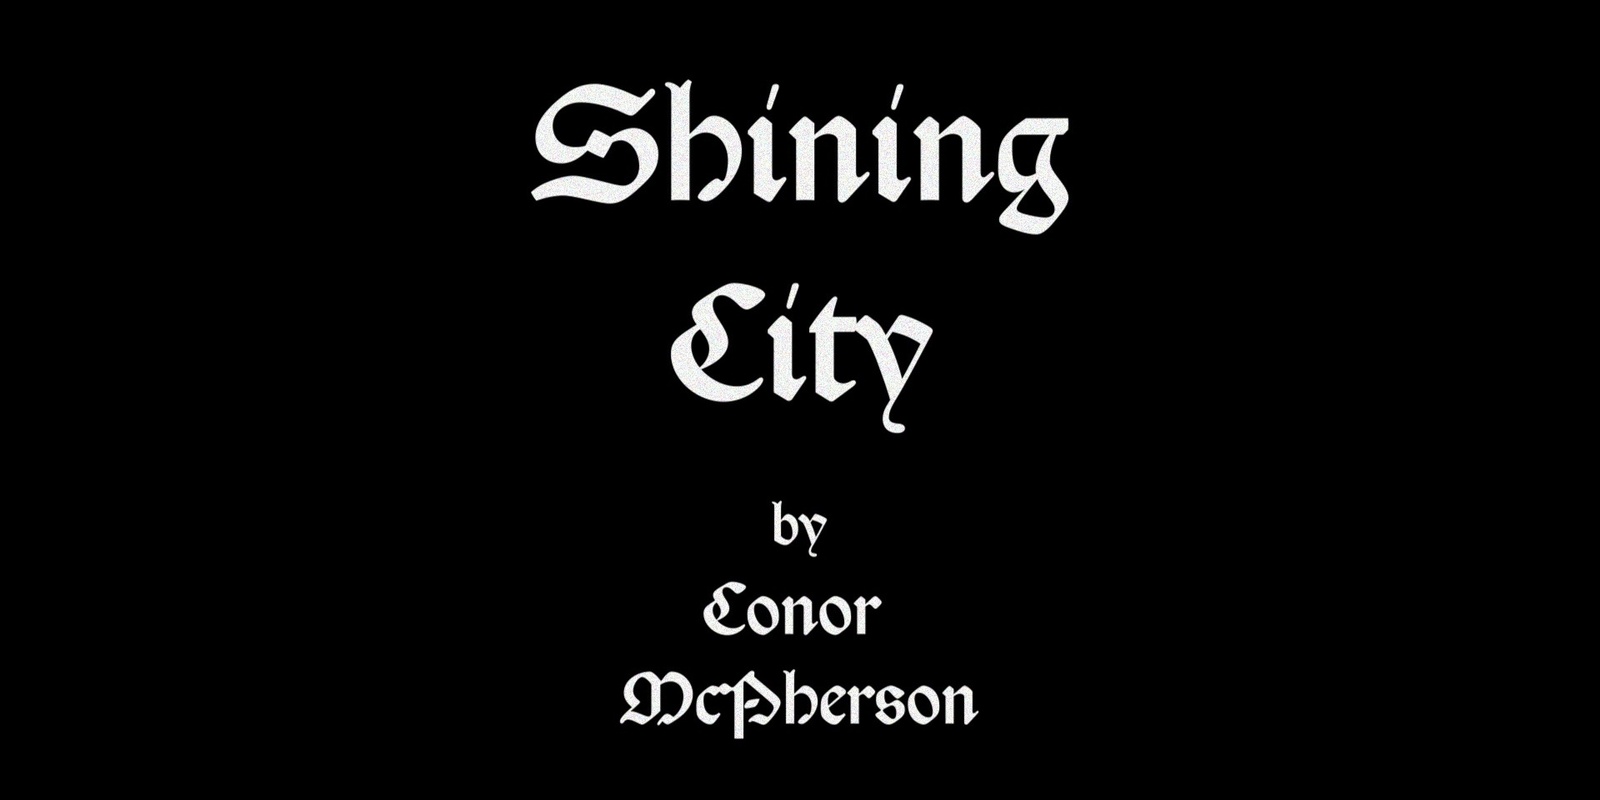 Banner image for Shining City by Conor McPherson